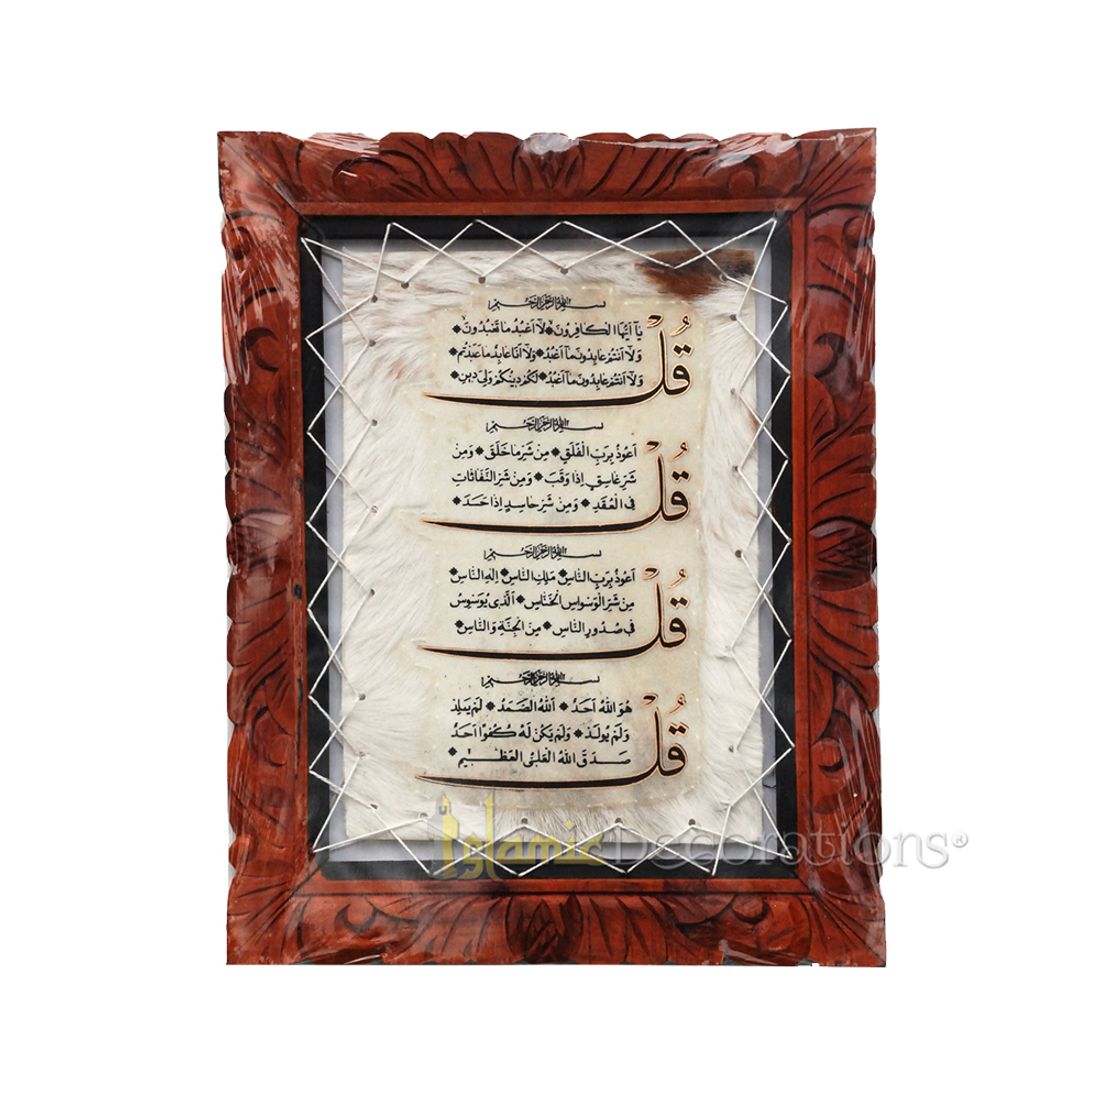 Large 4 Qul Surah Chapters of Quran Decoration Goat Hide Calligraphy 17.75 x 21.5 inch